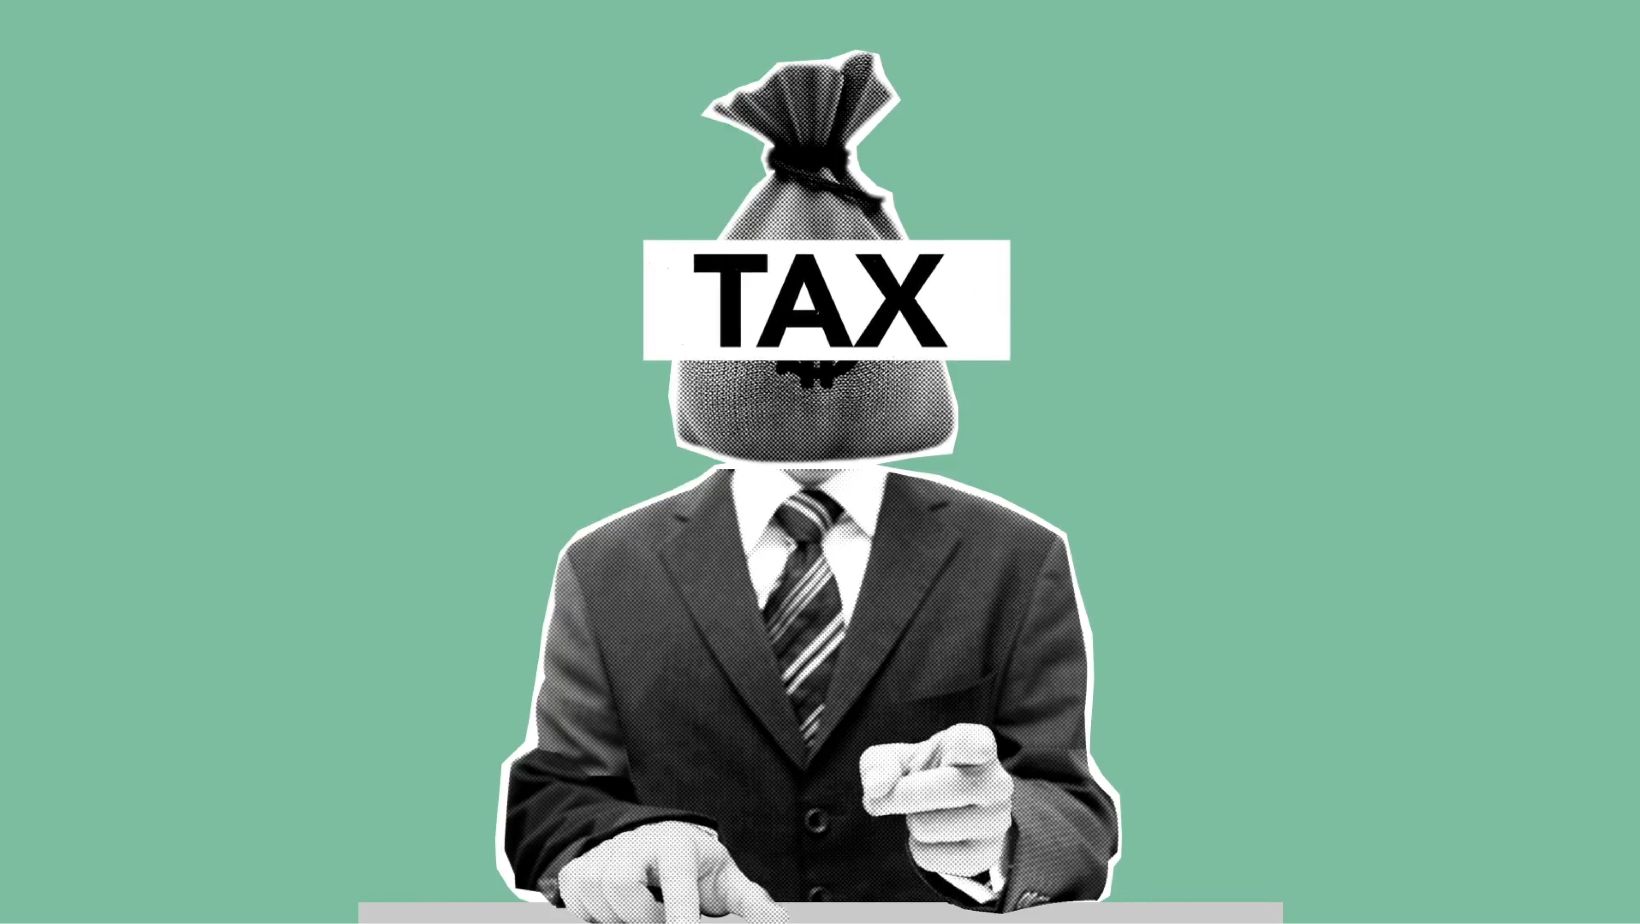 when preparing your taxes, what can possibly help reduce the amount of taxes that you owe?